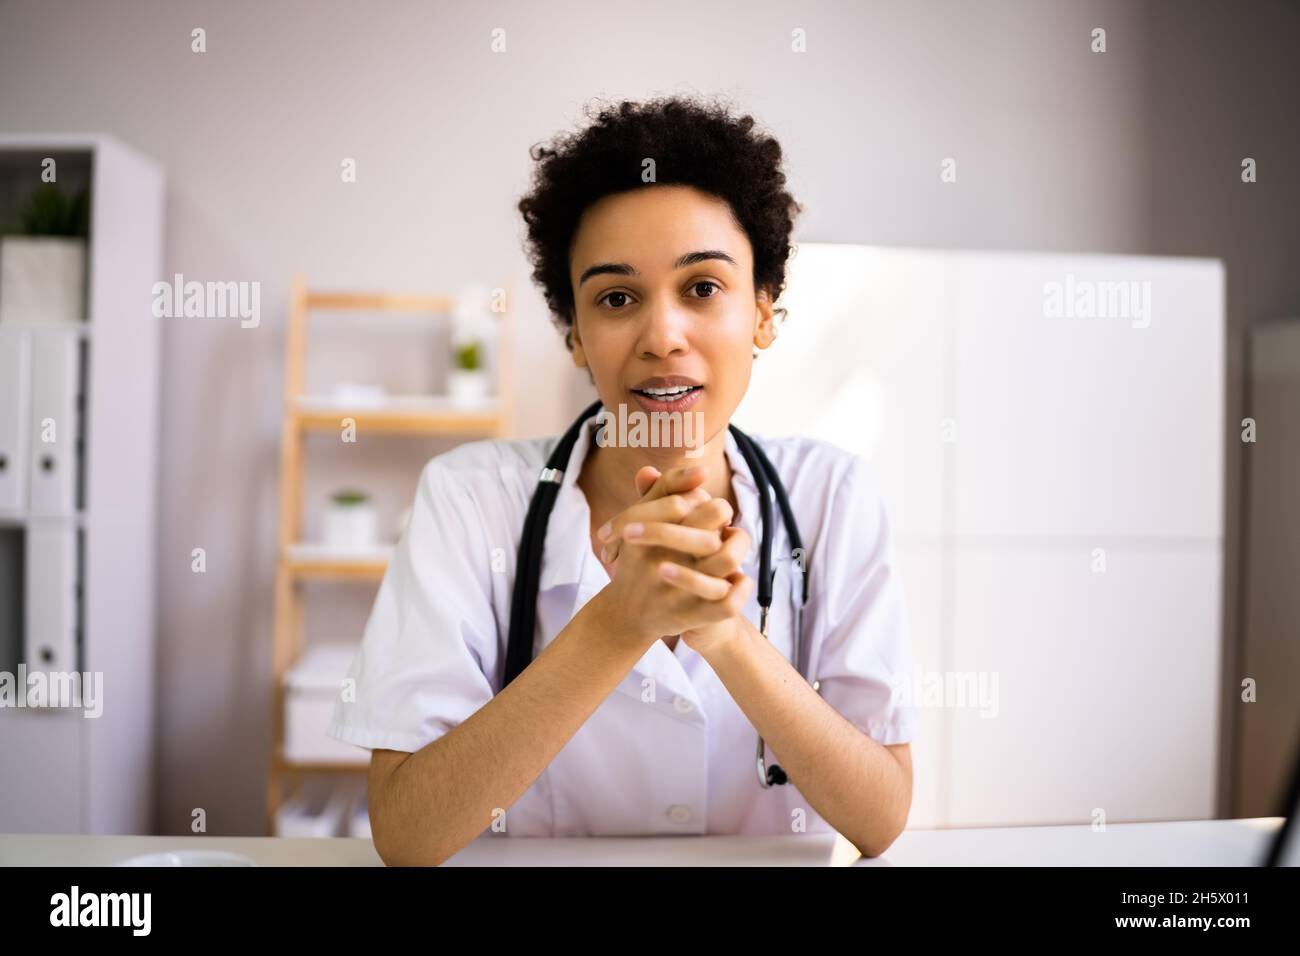 Professional African American Doctor Woman In Video Conference Stock Photo